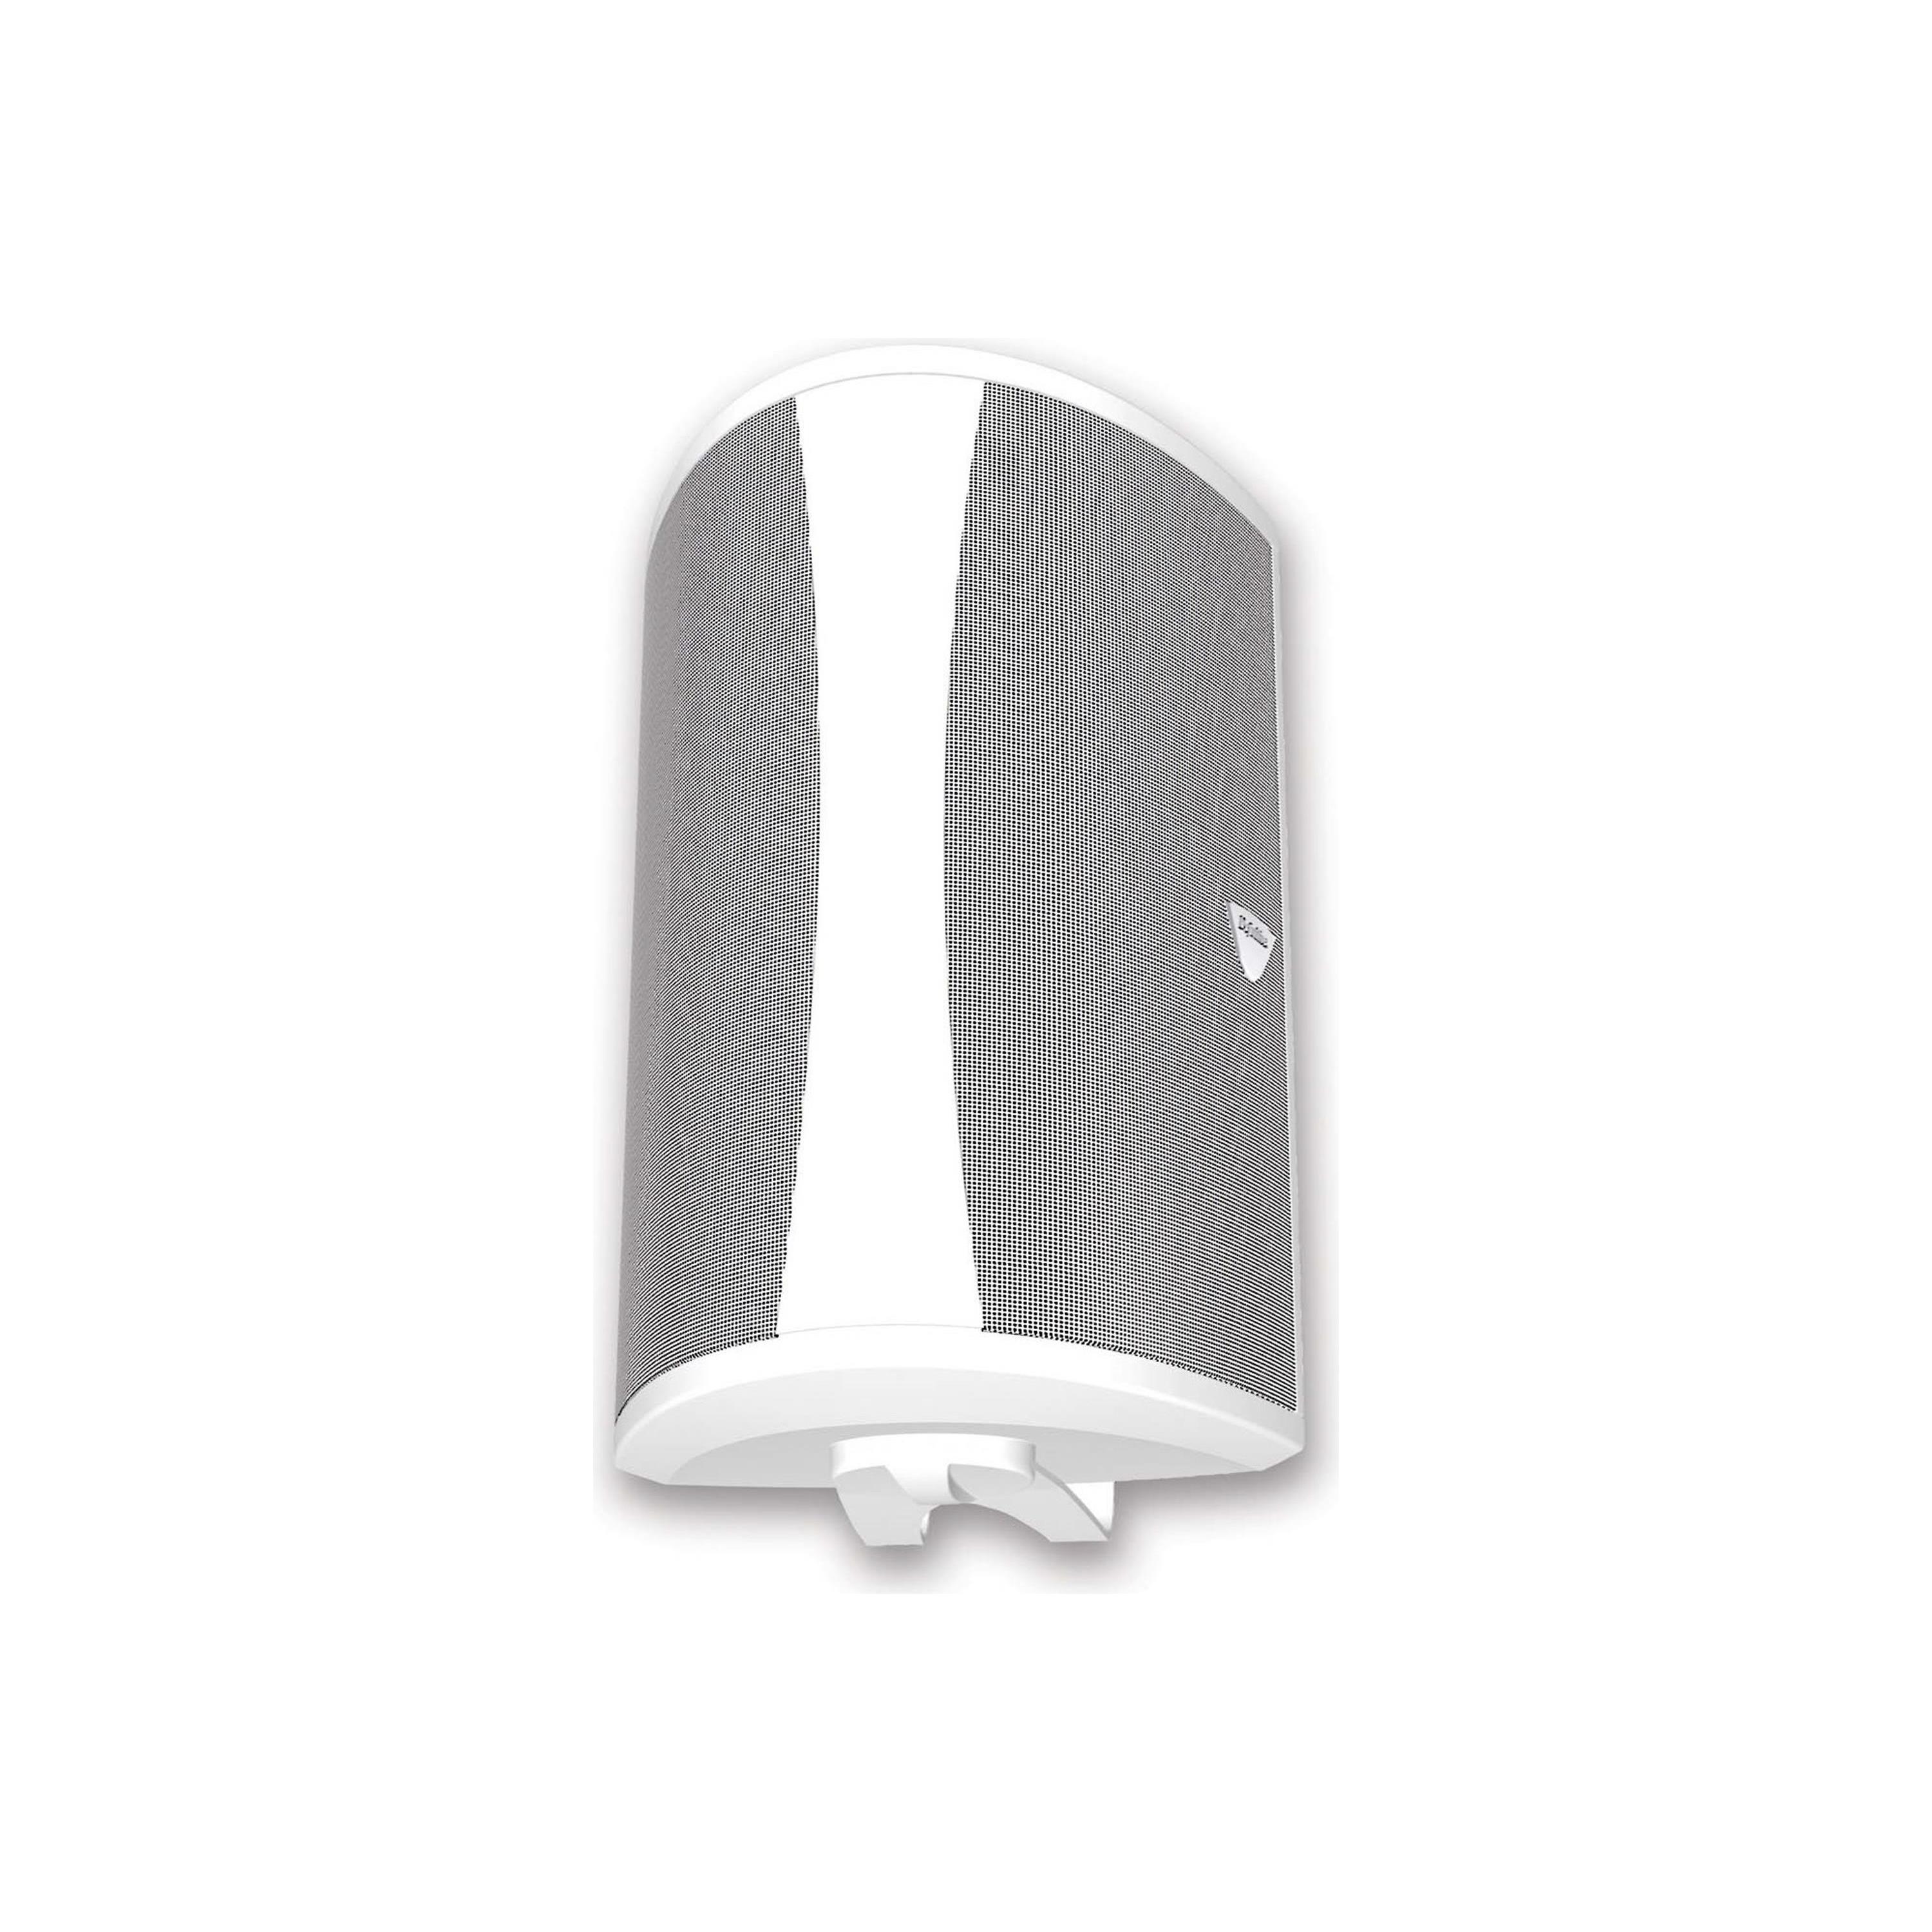 Definitive Technology AW5500 All-Weather Outdoor Speaker (White)